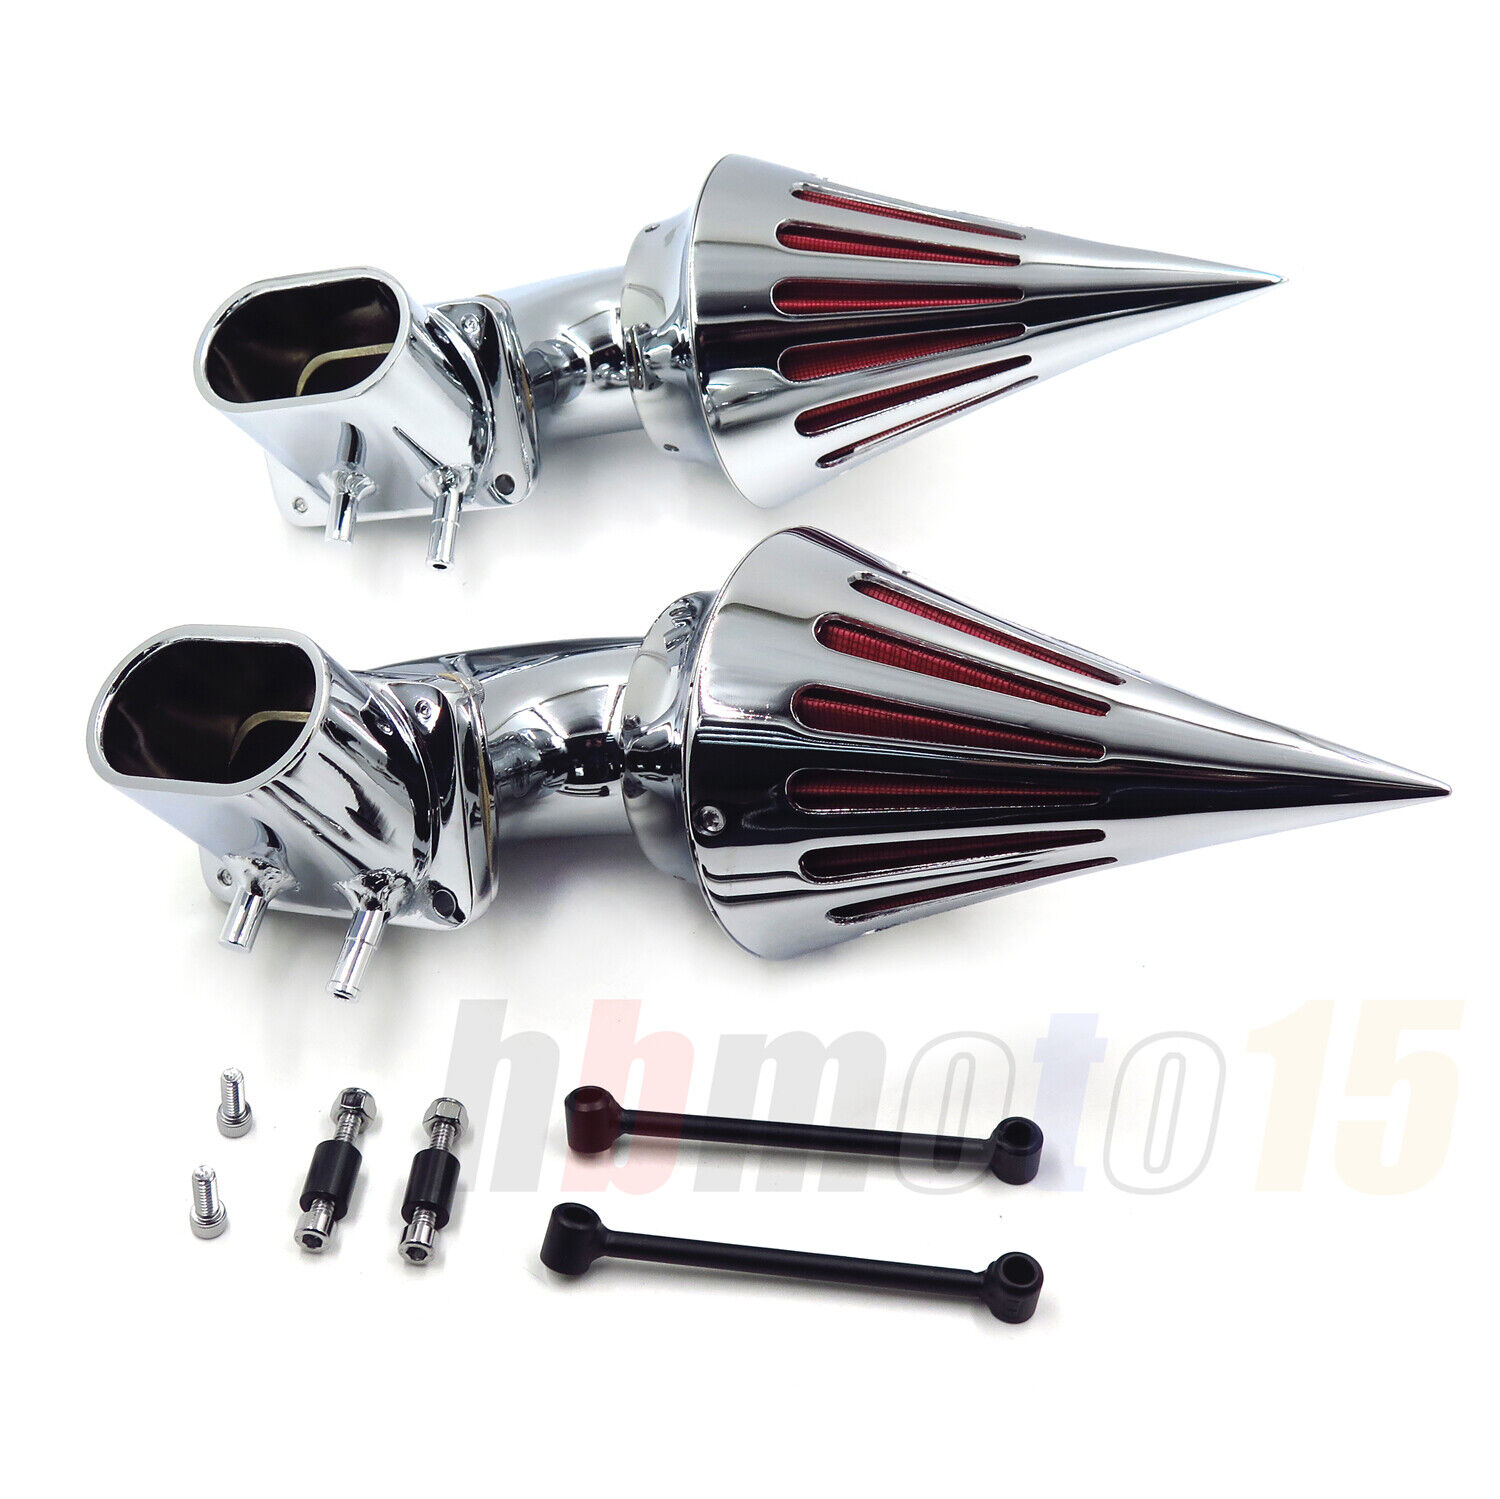 Chrome Spike Cone Air Cleaner Kit Intake Filter For Suzuki Boulevard M109 All